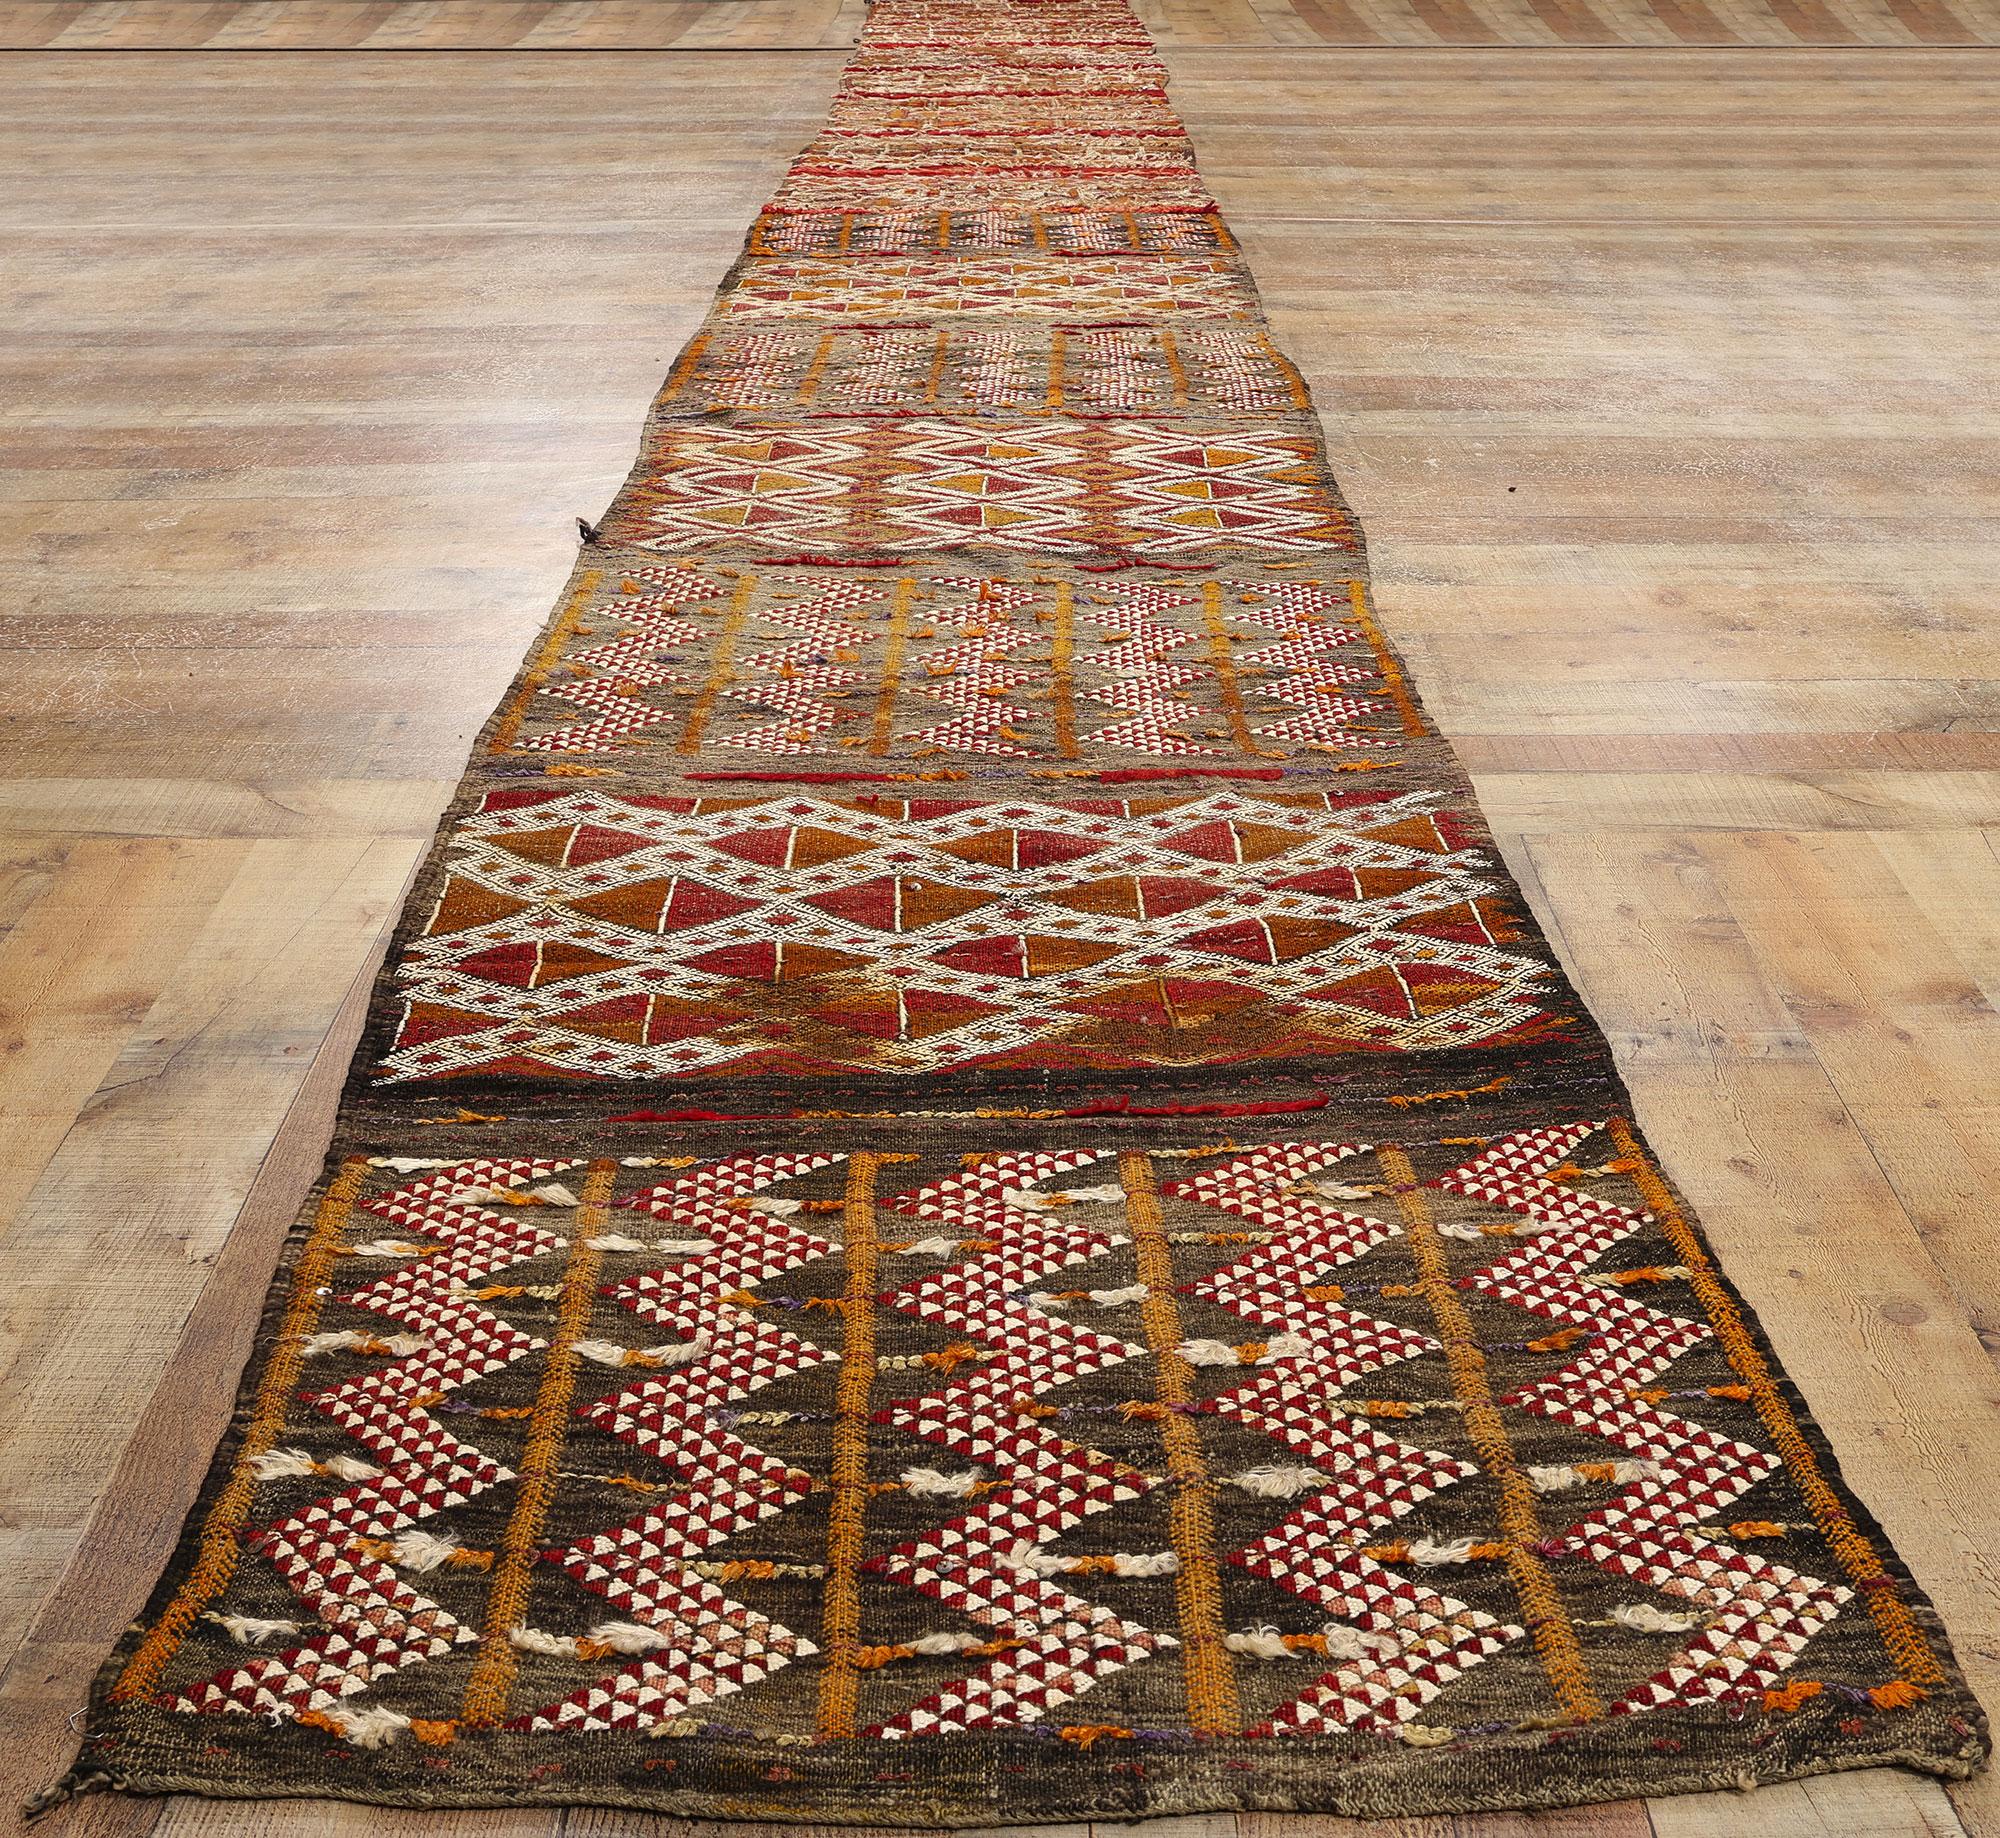 Midcentury Bohemian Vintage Moroccan Zemmour Kilim Berber Rug, 02'07 x 23'02 In Good Condition For Sale In Dallas, TX